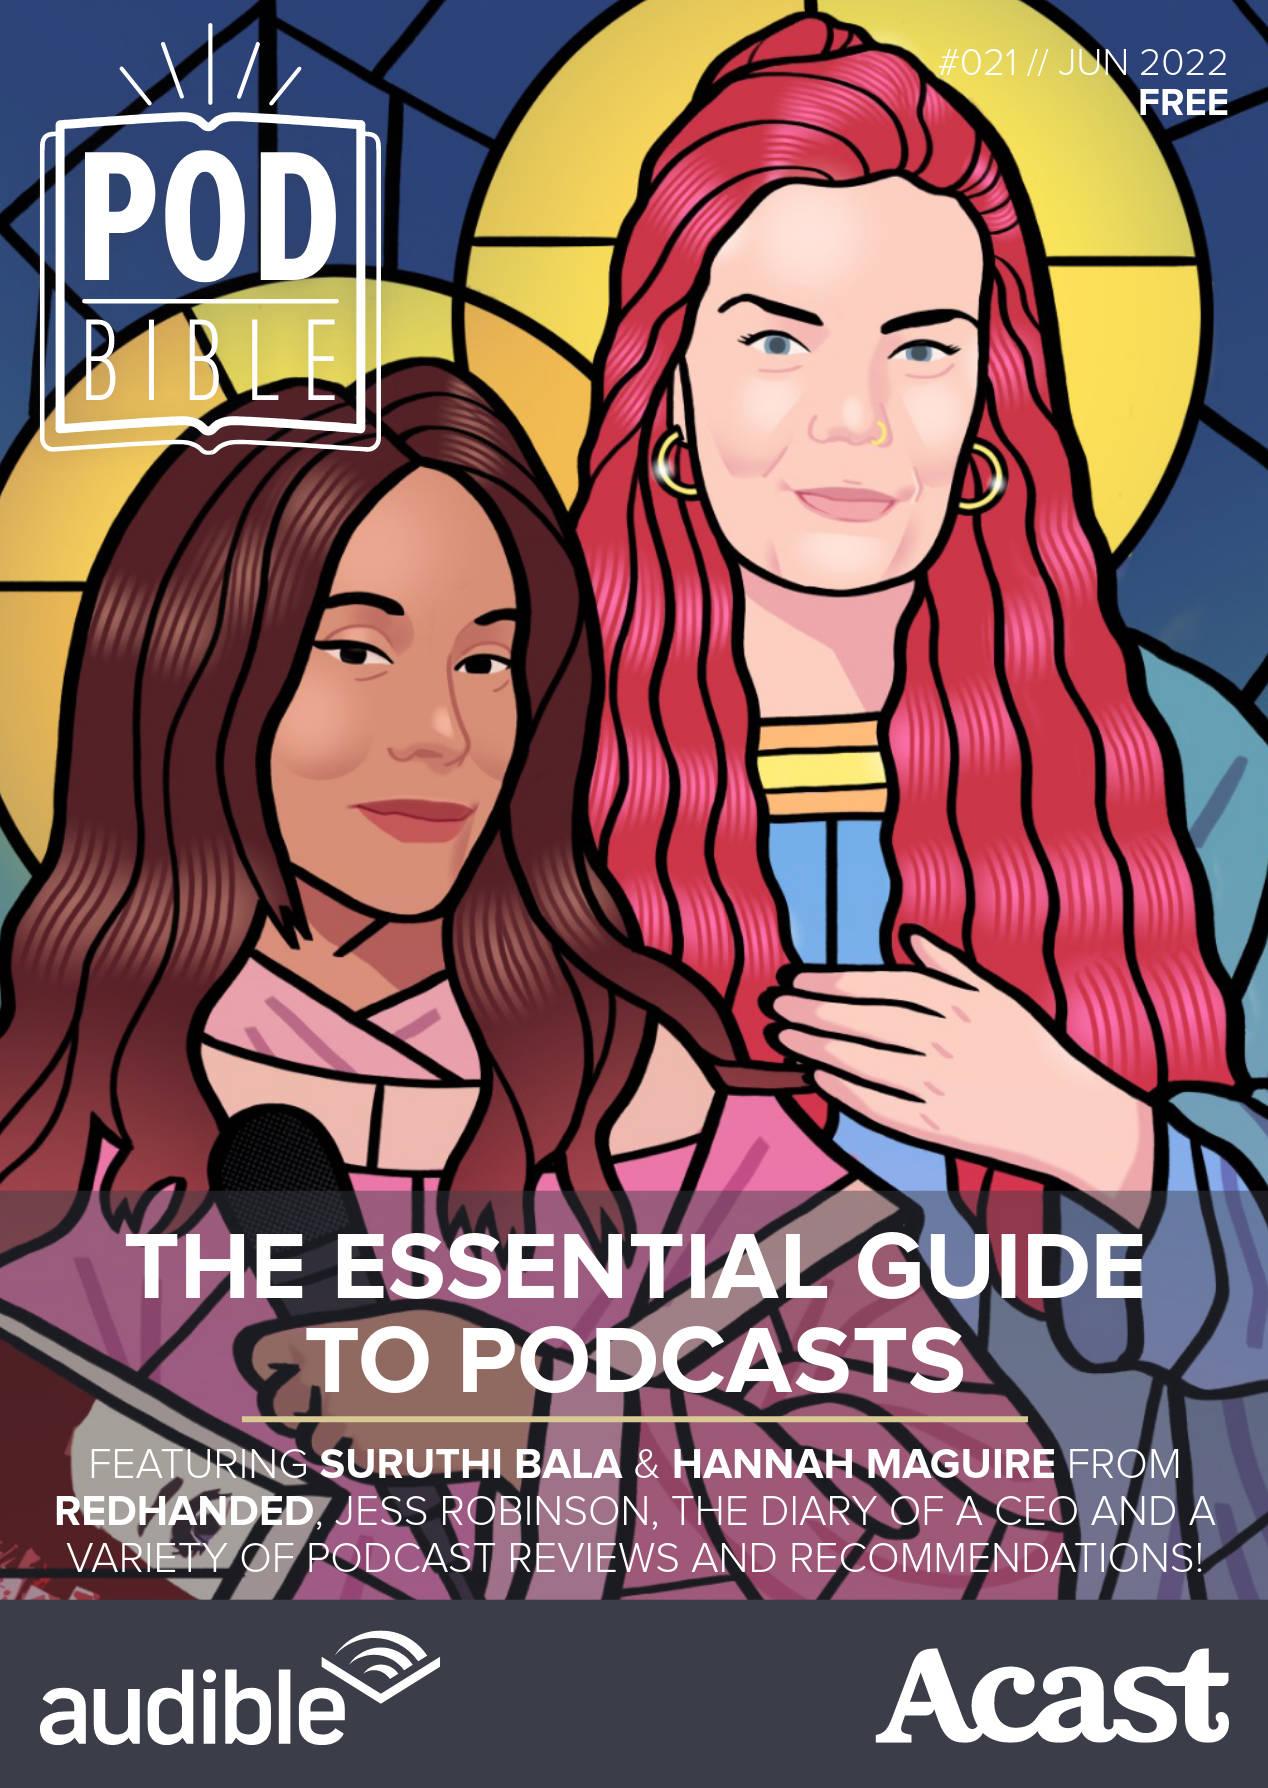 Pod Bible #021 cover